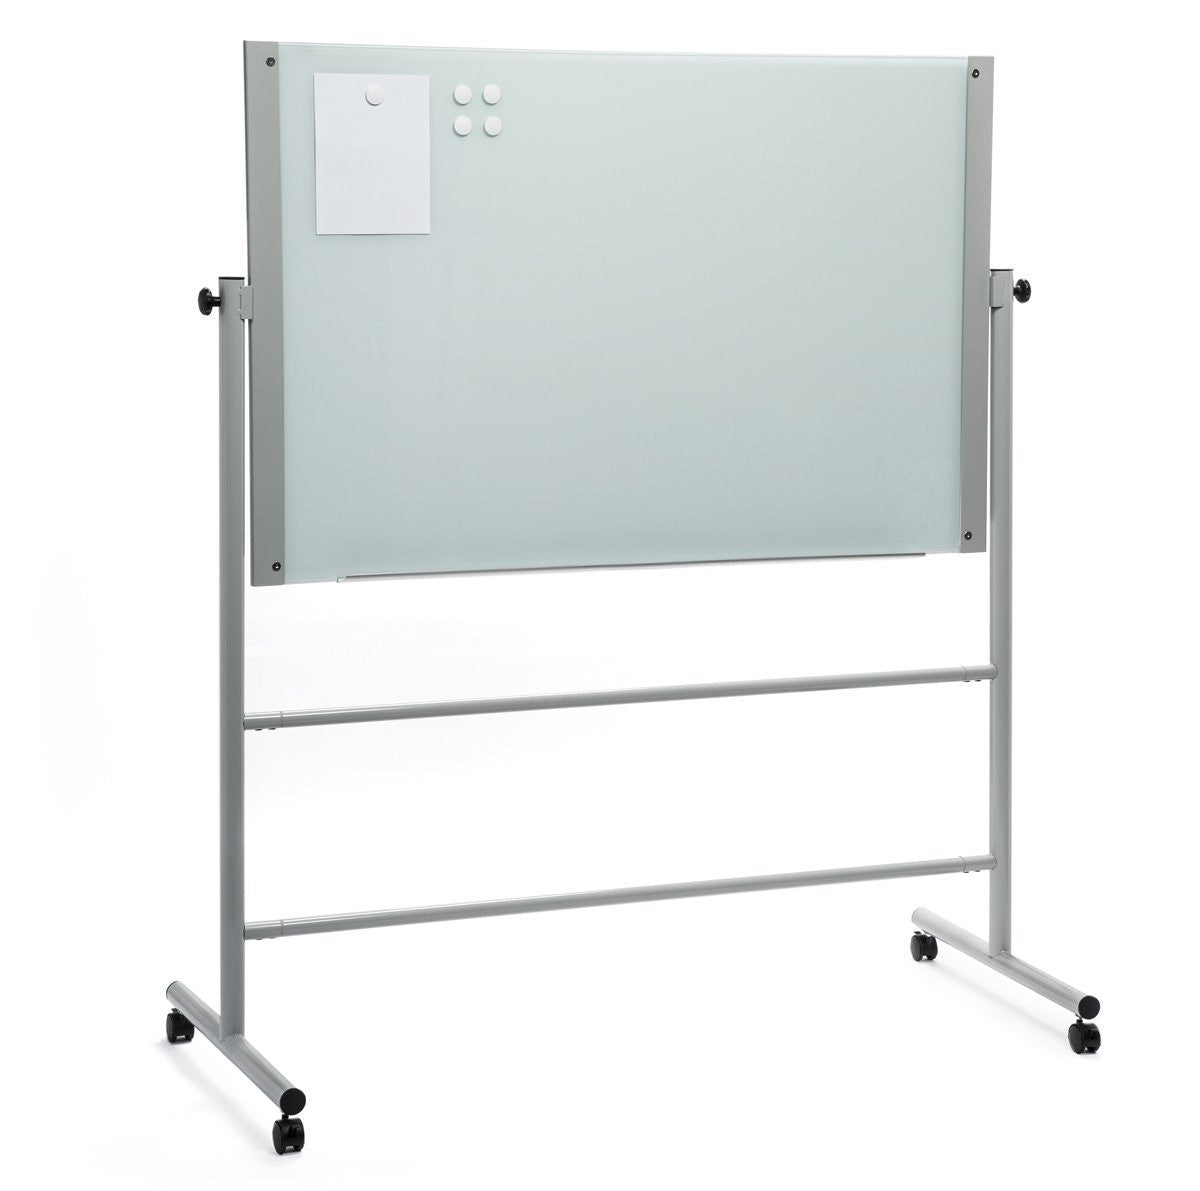 Easel Stand For Glass Dry-Erase Boards (Stand Only Does Not Include Glass Board). Locking wheels and mobile.  Shown with board installed and magnets holding paper for presentation. 